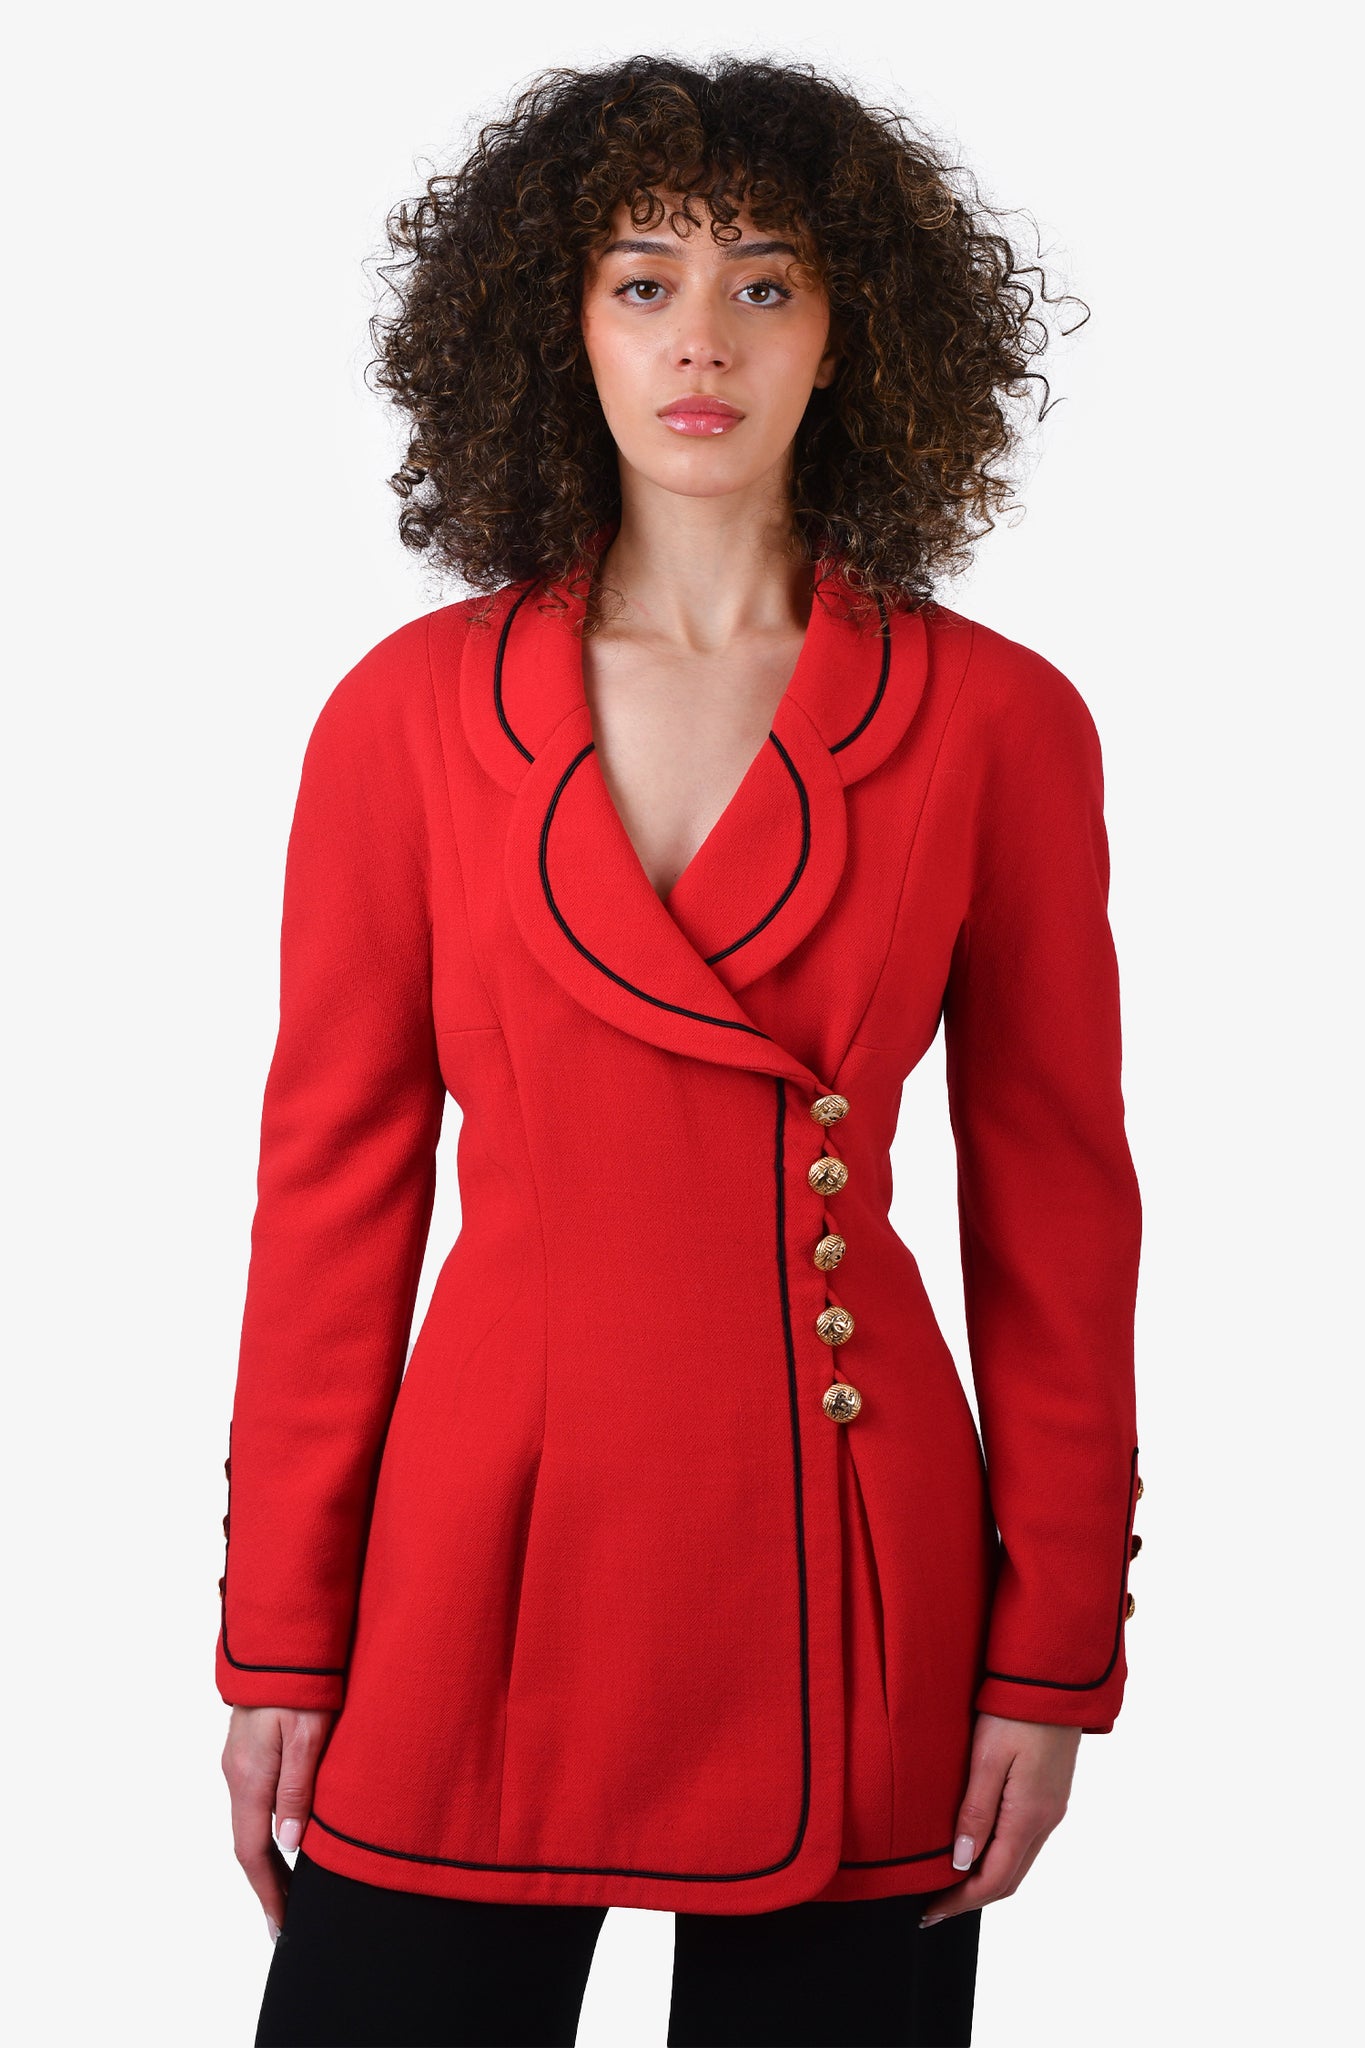 Chanel 1990 Red Scalloped Collar Double Breasted Blazer with Gold Buttons Size 38